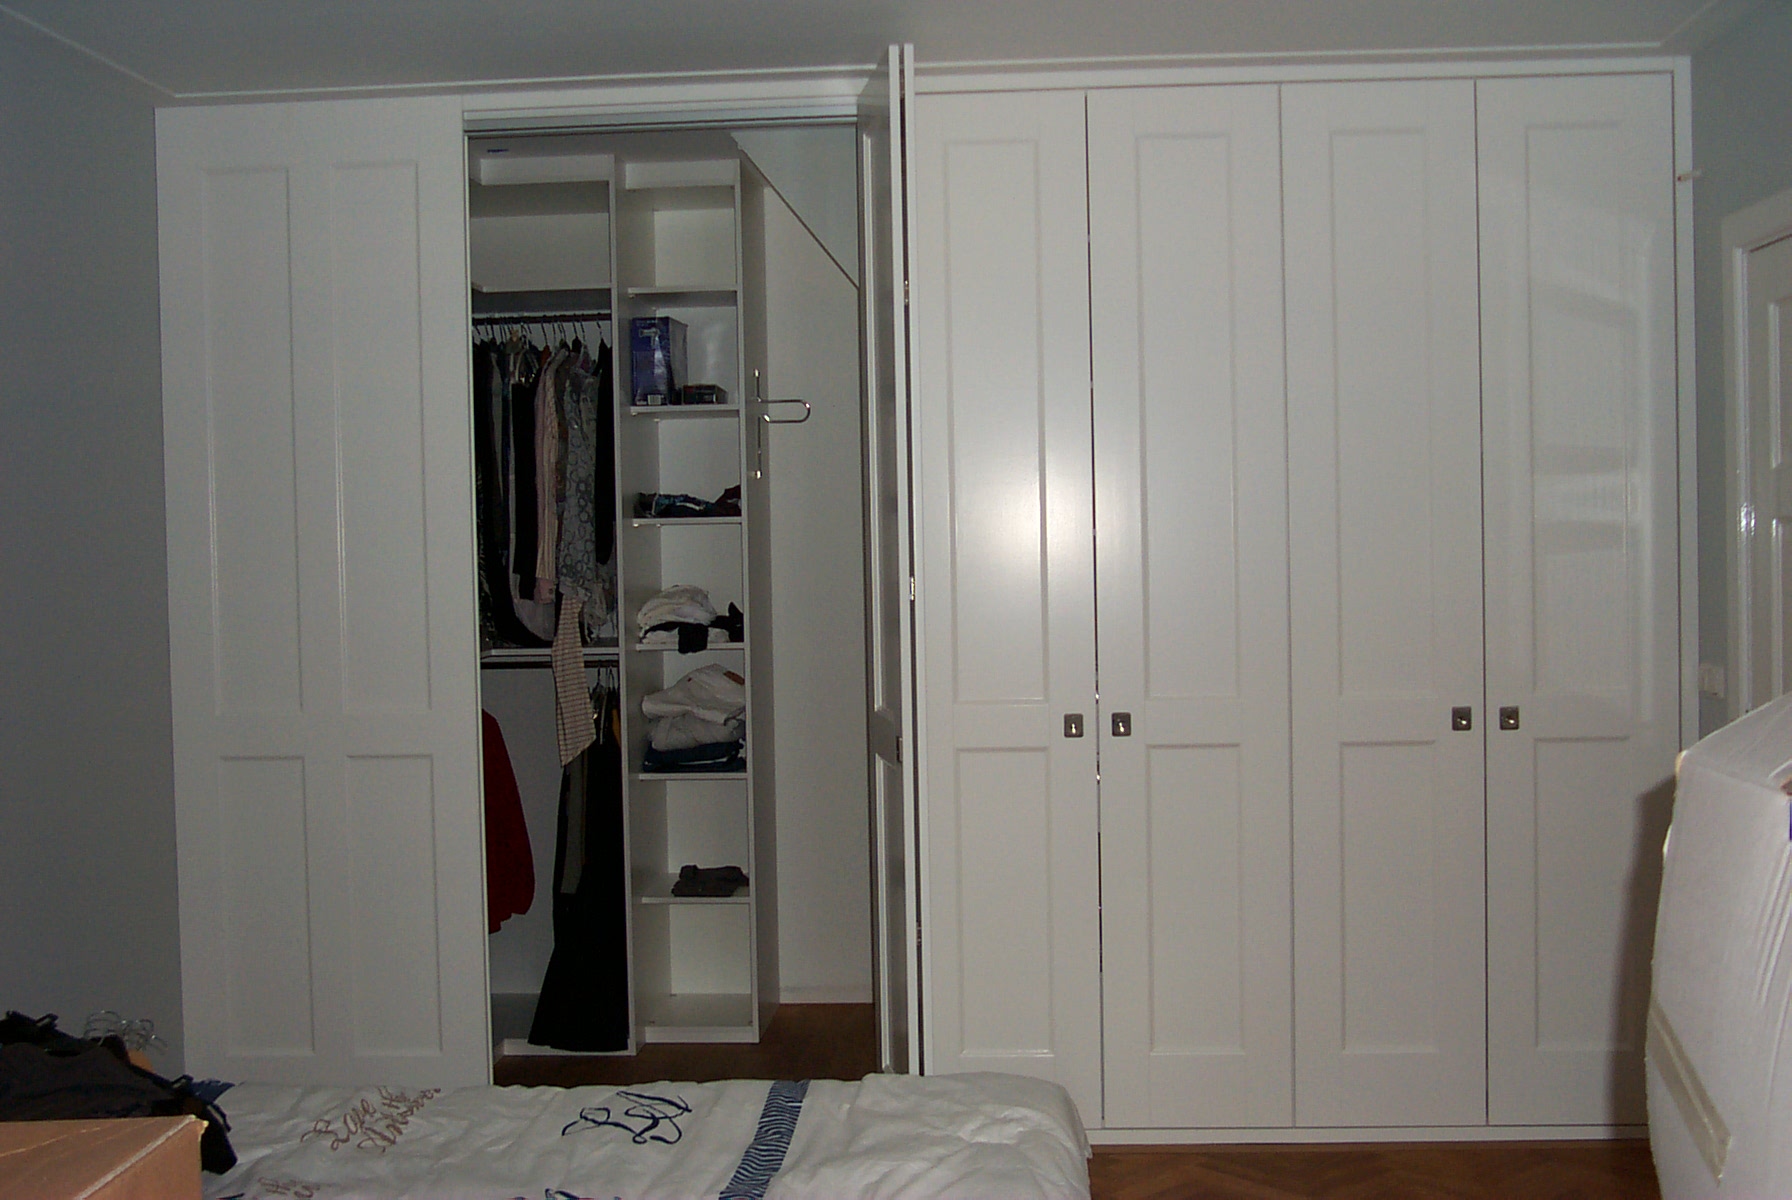 A wardrobe with a partial walk-in wardrobe, with storage shelves and hanging areas as well as a few drawers. The walk-in wardrobe is accessed by opening a folding door. Assembled by Flat Pack Happy.